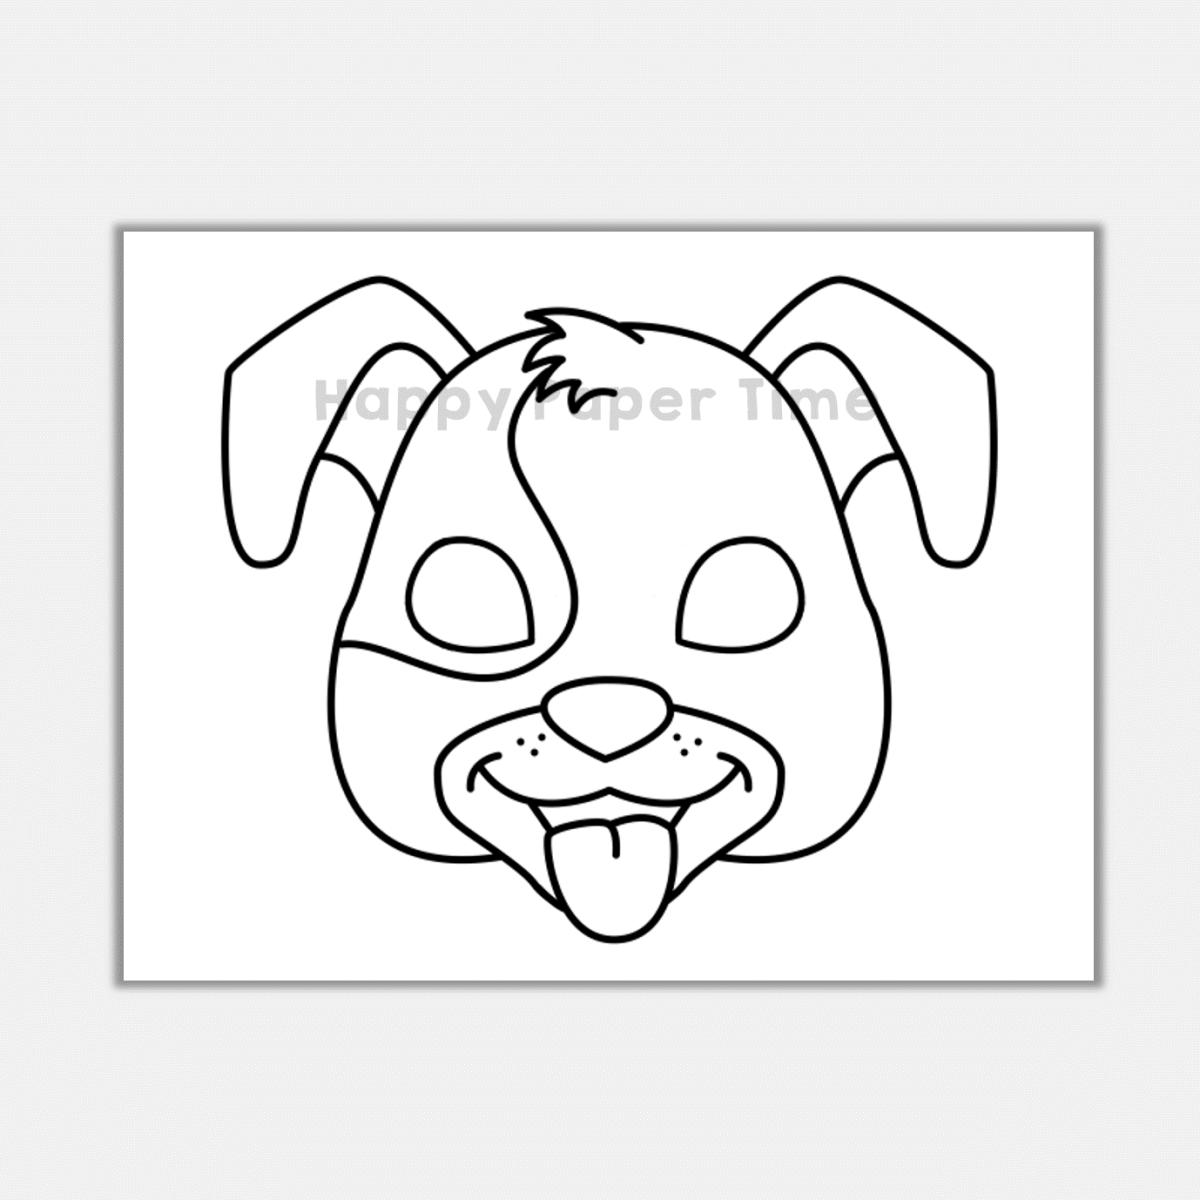 Dog paper mask printable animal pet coloring craft activity costume template made by teachers